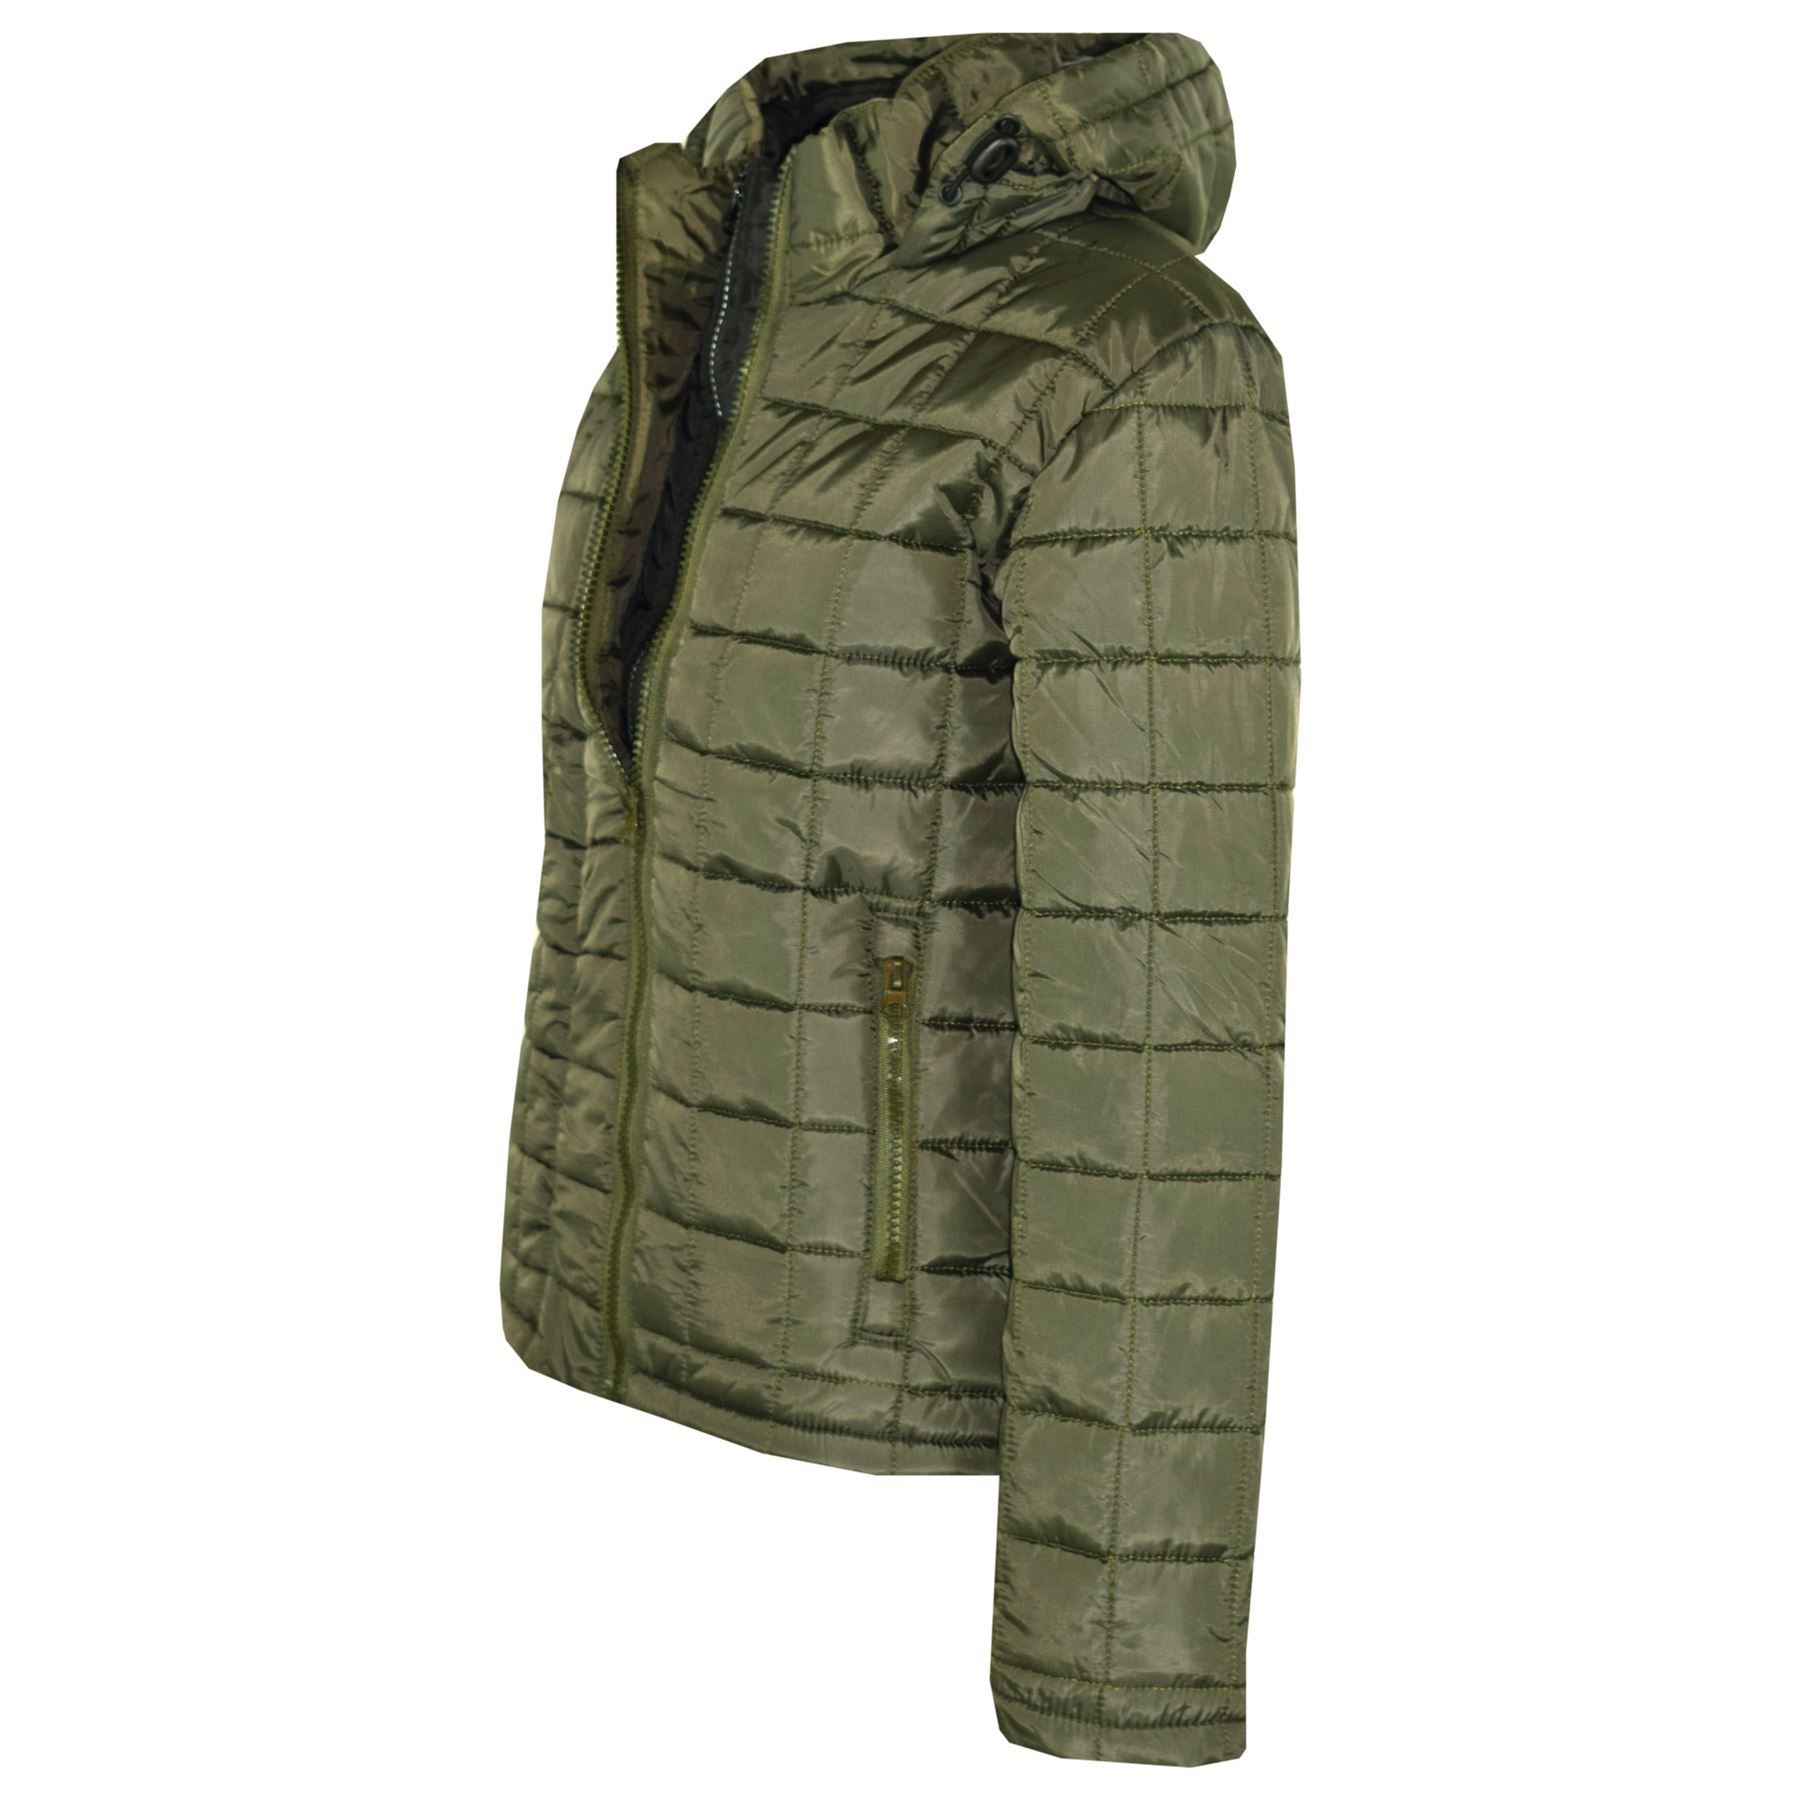 Kids Padded Olive Jackets Boys Hooded Puffer